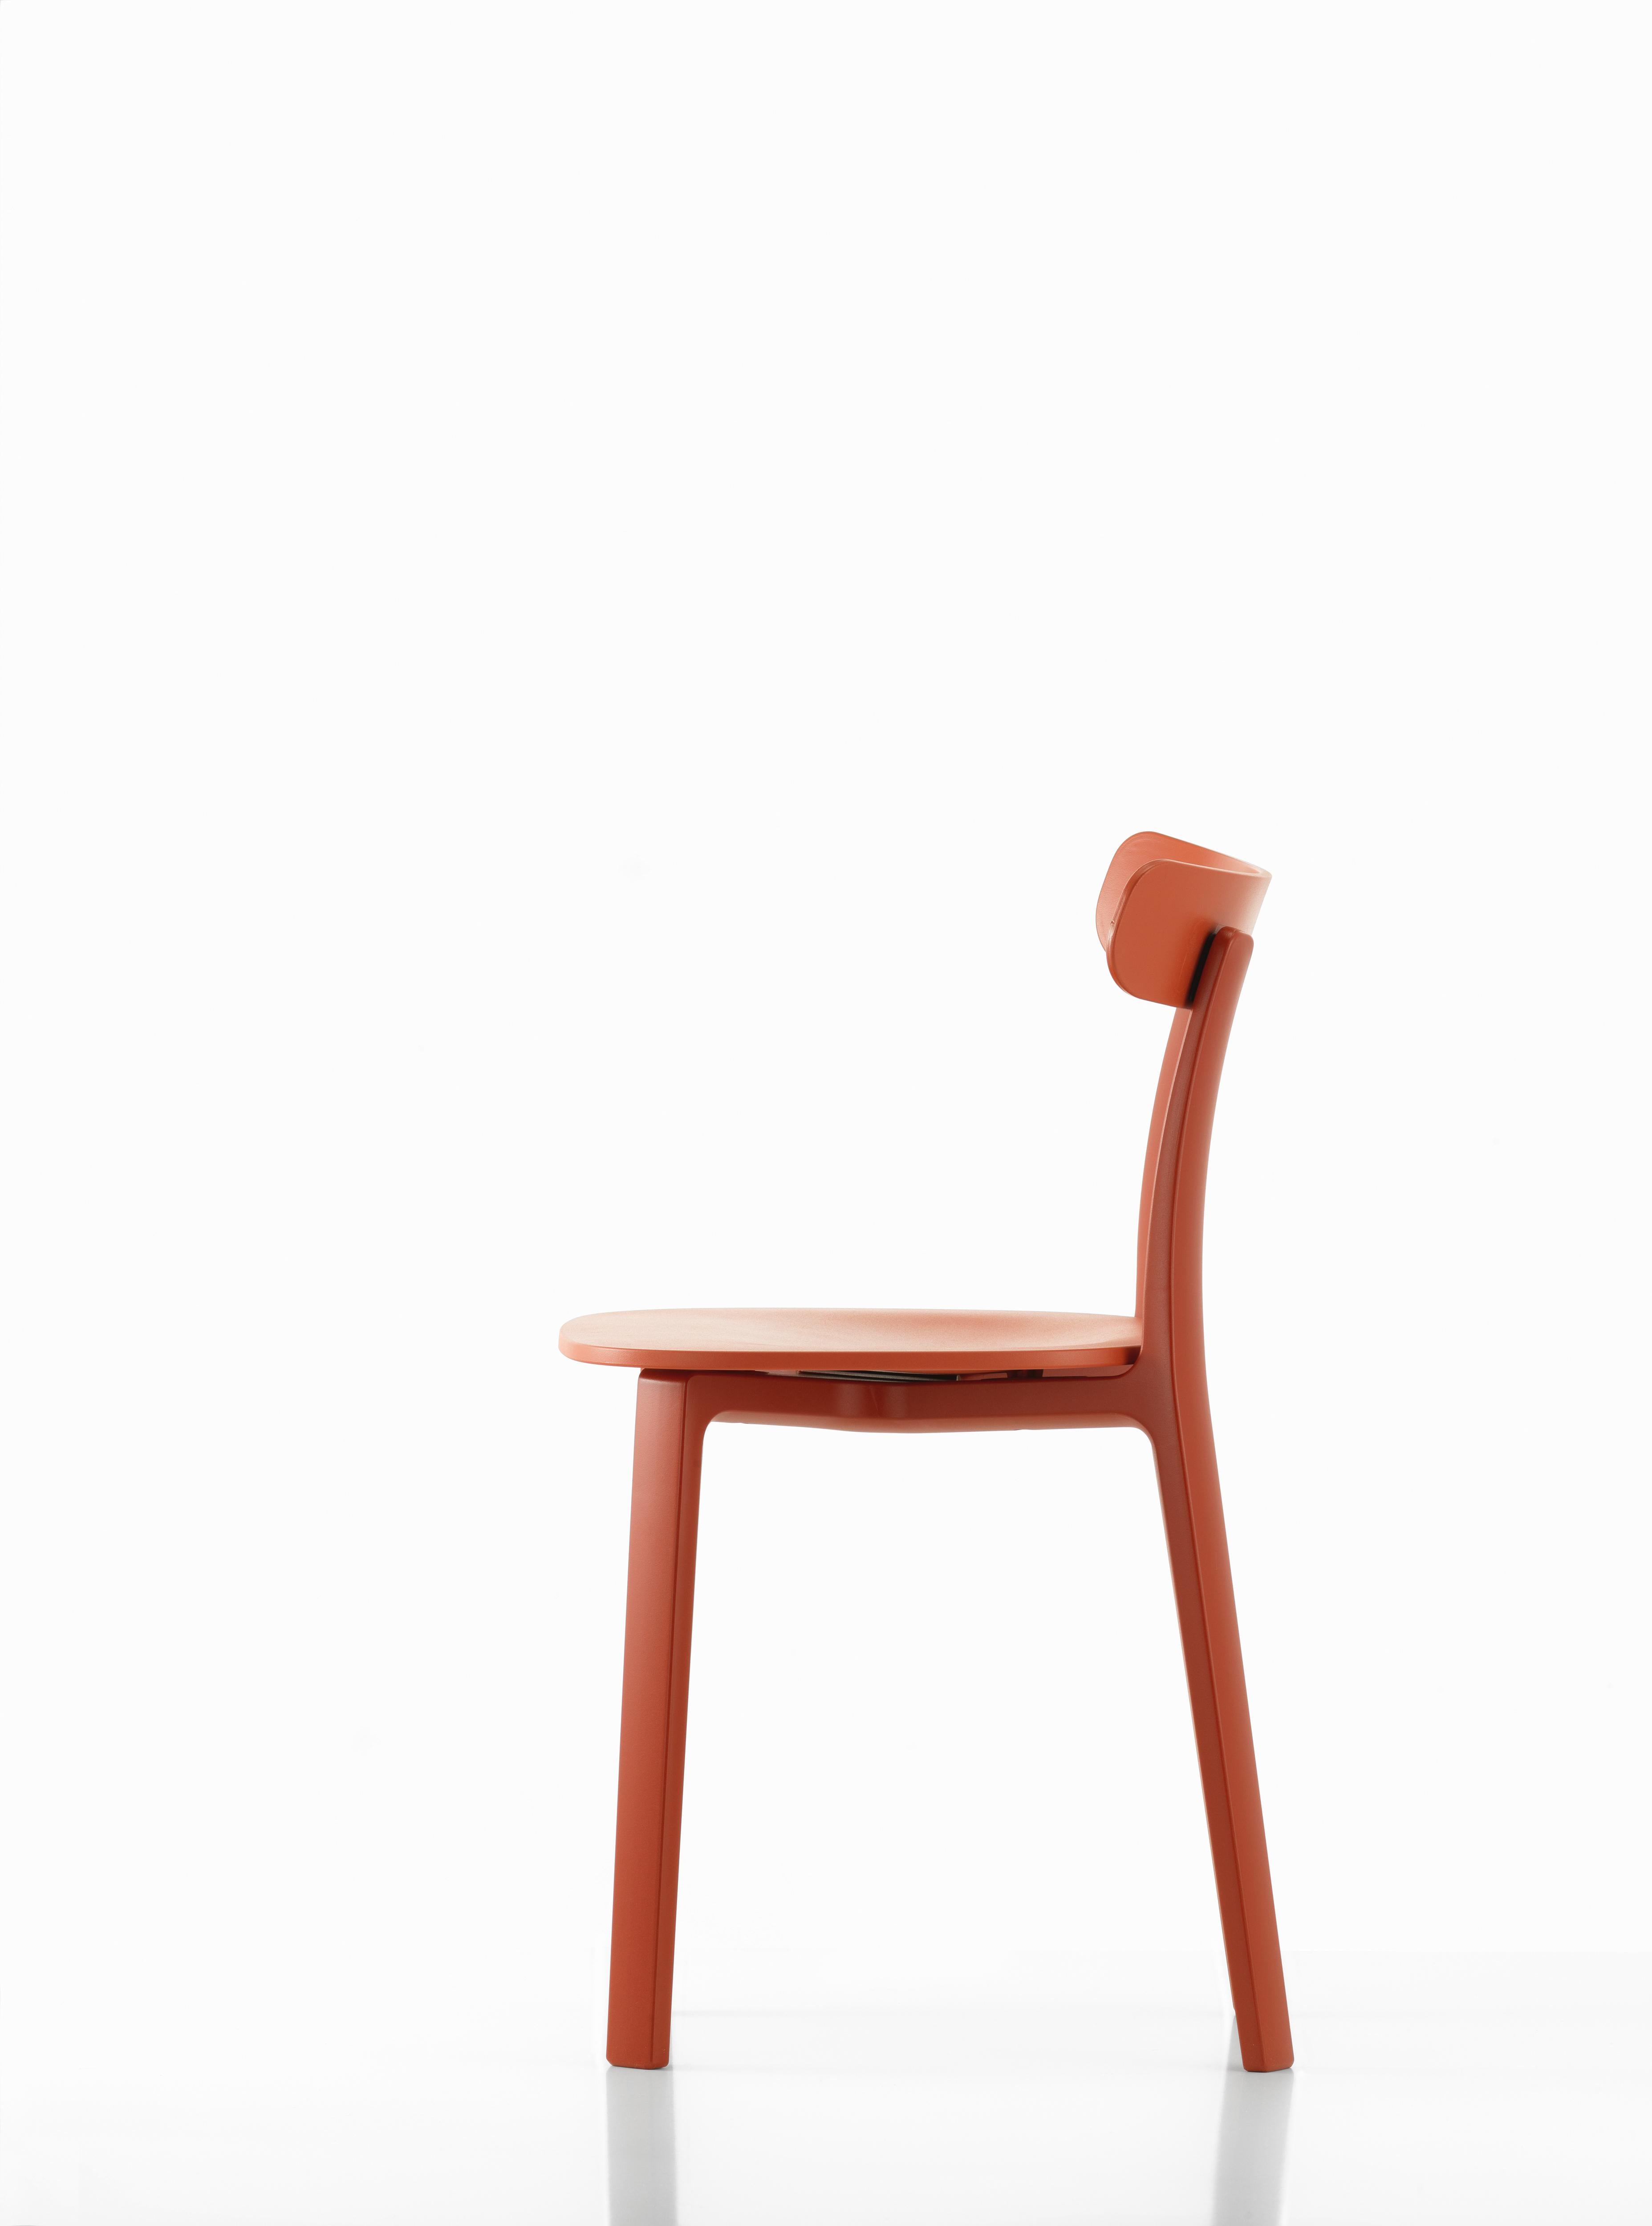 Modern Vitra All Plastic Chair in Brick Two-Tone by Jasper Morrison For Sale